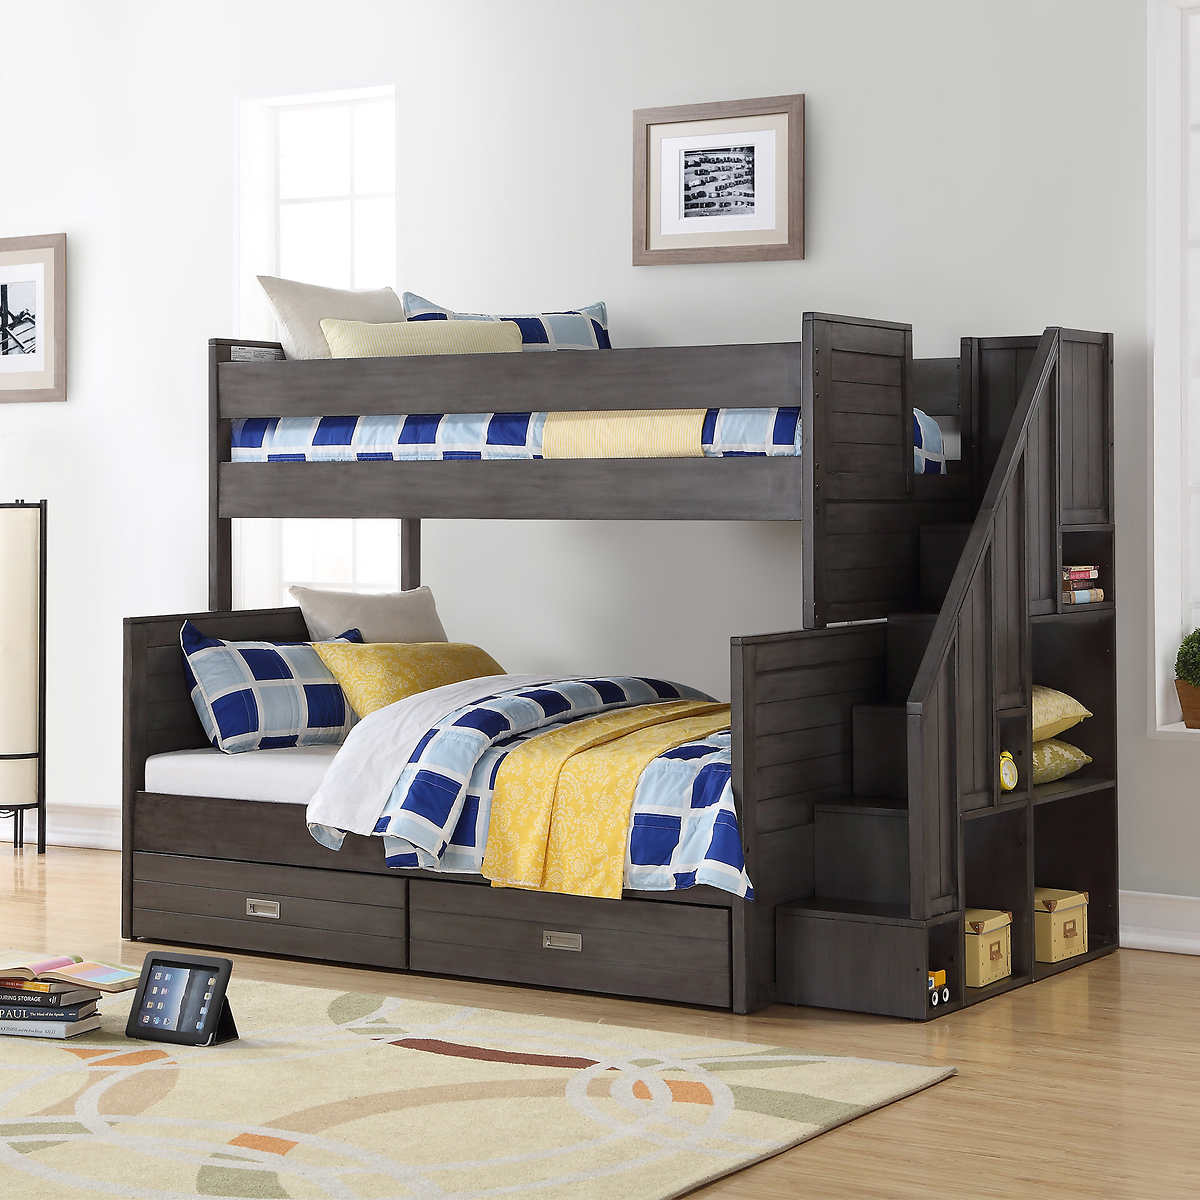 Caramia Kids Dylan Twin Over Full Bunk, Images Of Cool Bunk Beds